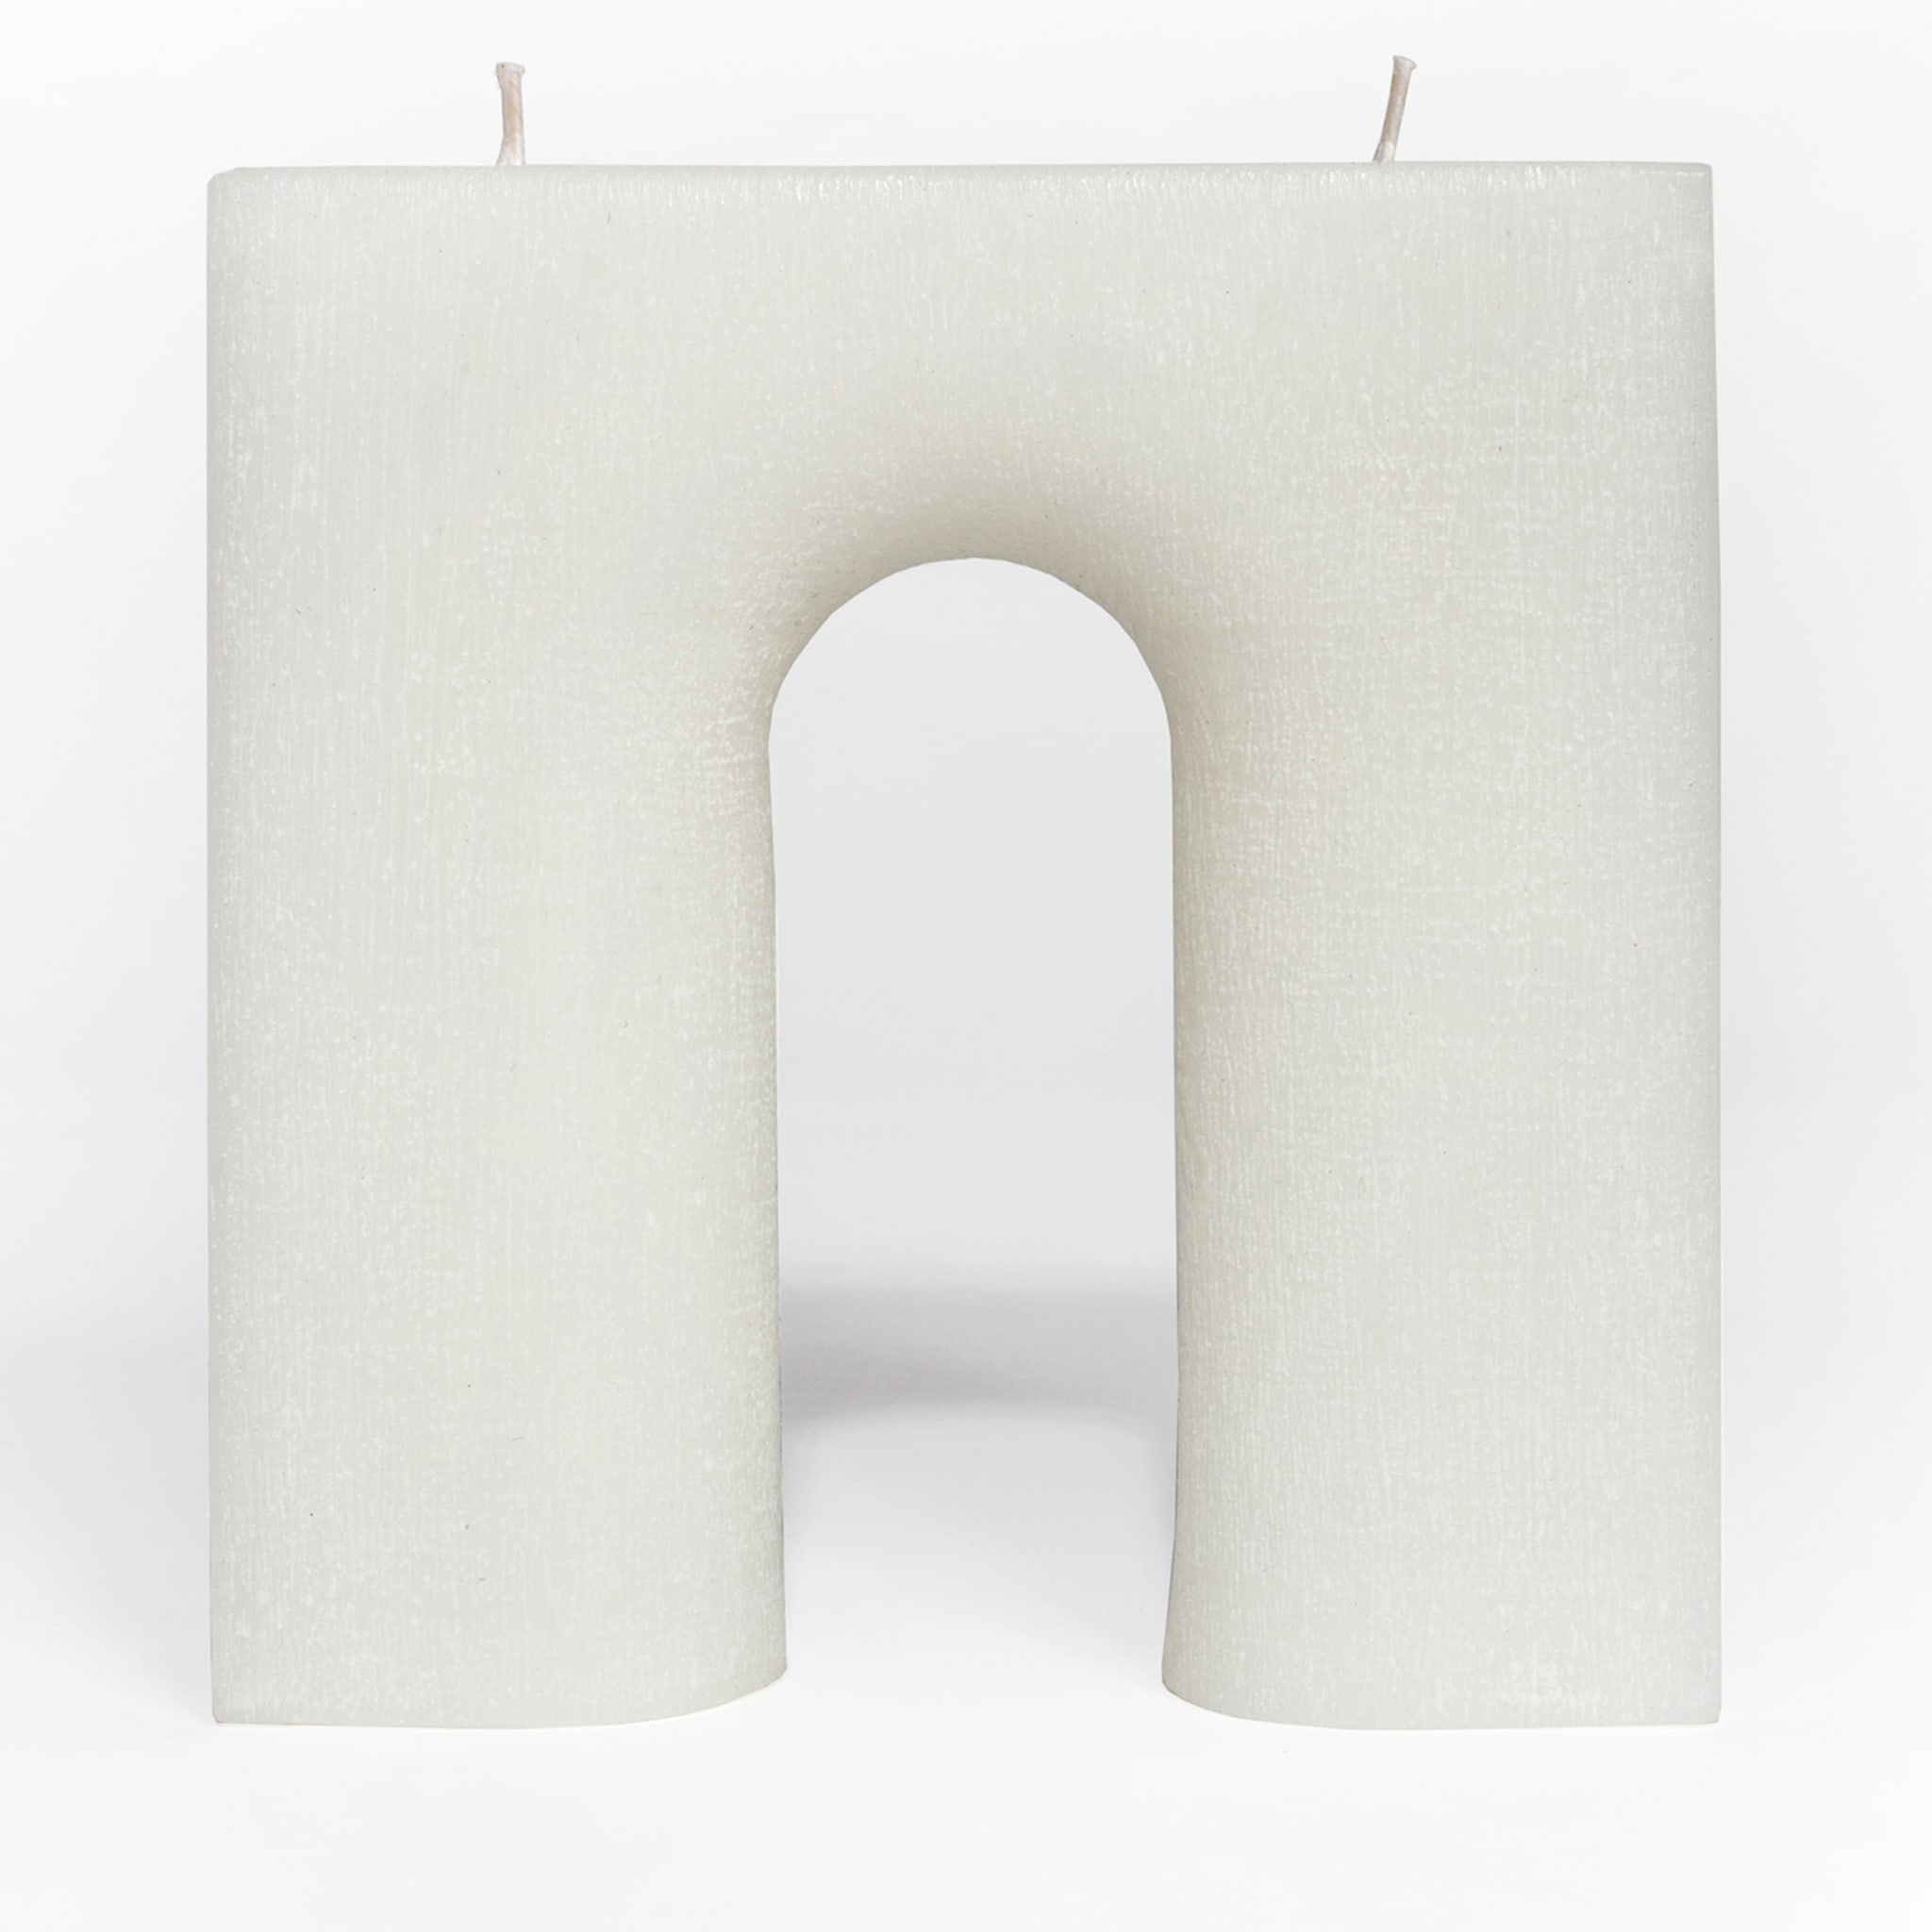 Trionfo Set of 2 Black and White Candles - Alternative view 4